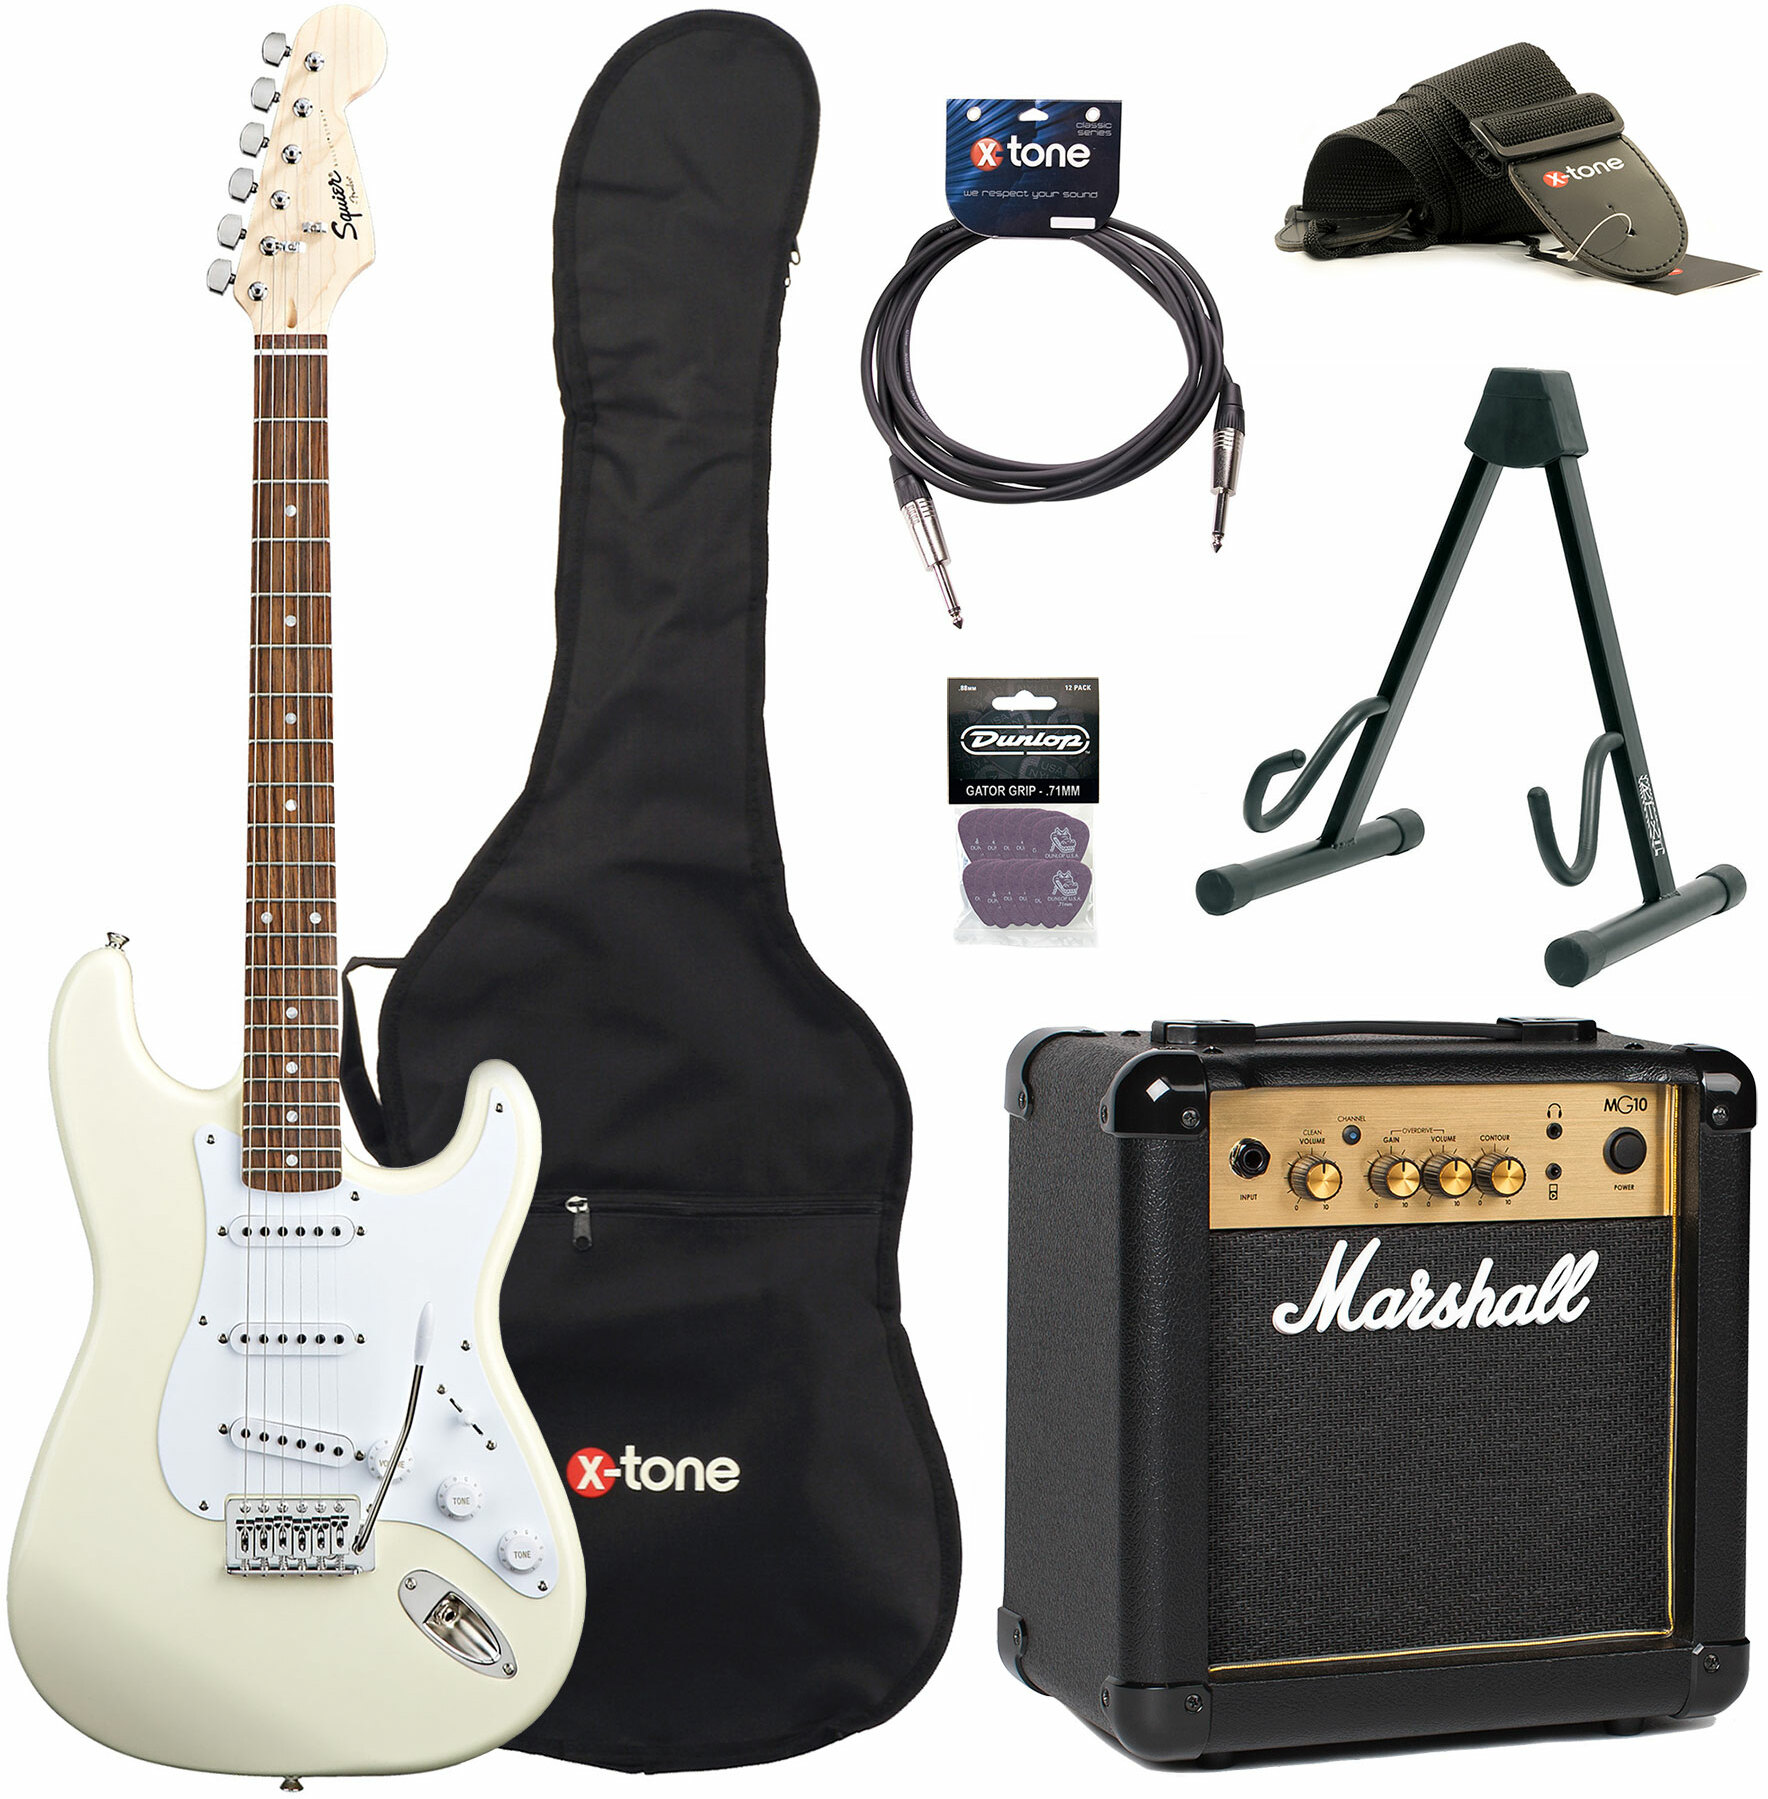 Squier Strat Bullet Sss + Marshall Mg10g + Access X-tone - Arctic White - E-Gitarre Set - Main picture